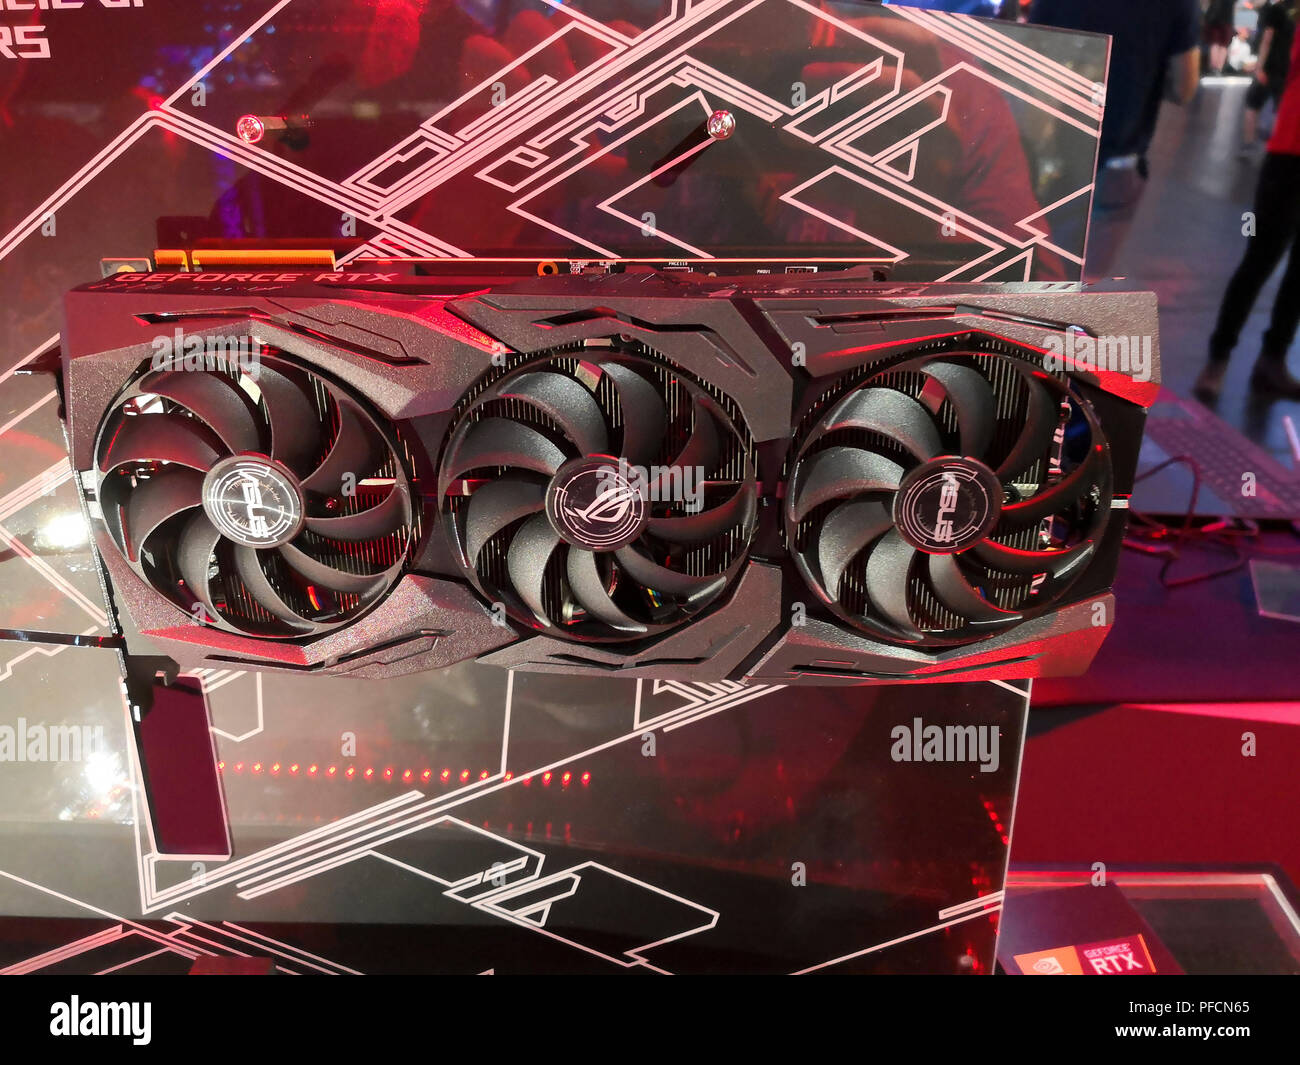 Cologne, Germany, 21st of August 2018, Nvidia GeForce RTX 2080 graphic card  from Asus. Credit: Jovana and Miodrag Kuzmanović/Alamy Live News Stock  Photo - Alamy